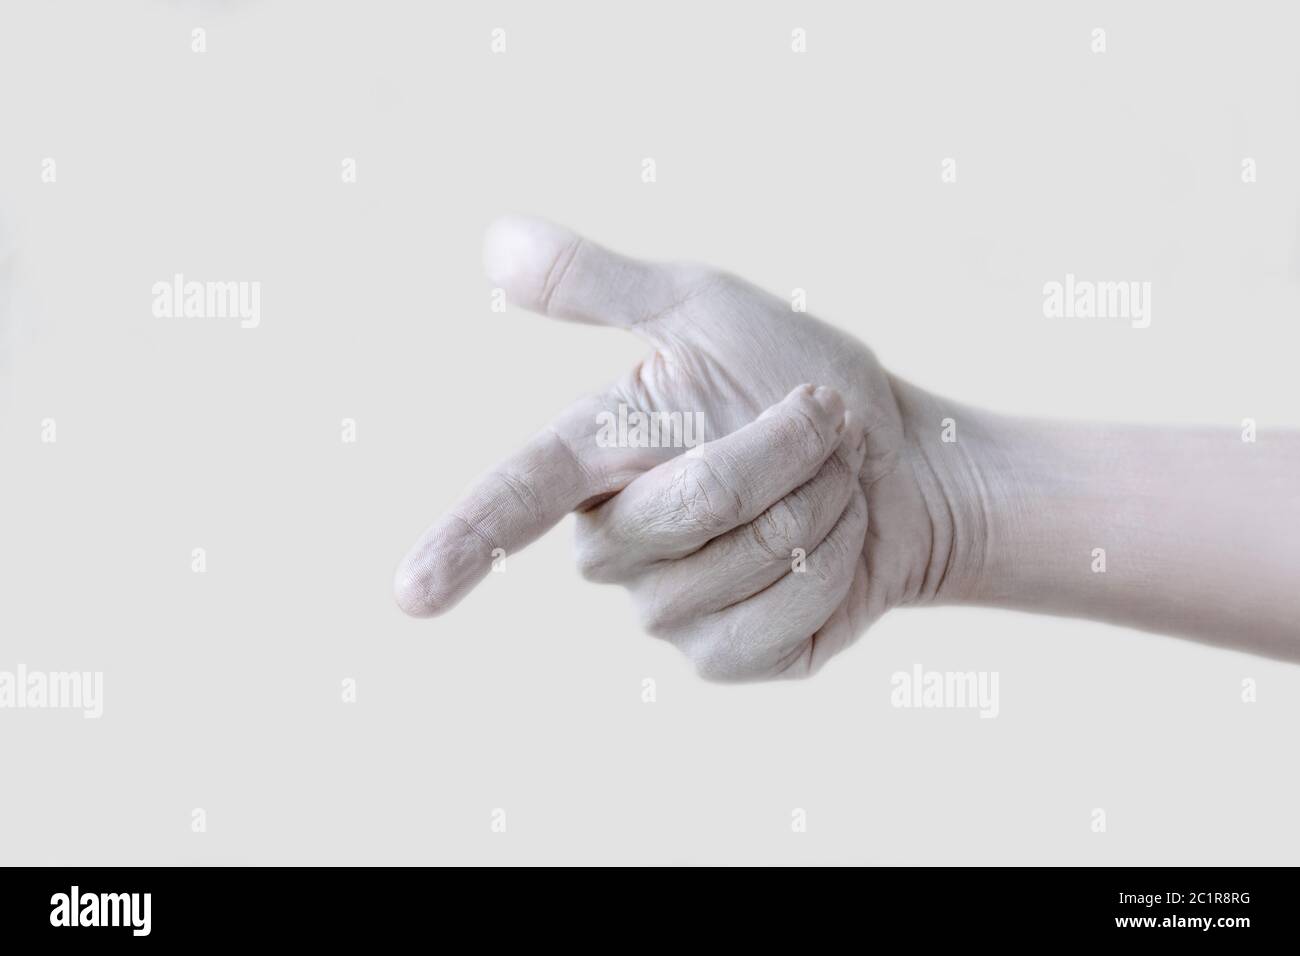 Gestures, positions and expressions with feminine hands, arm and fingers Stock Photo